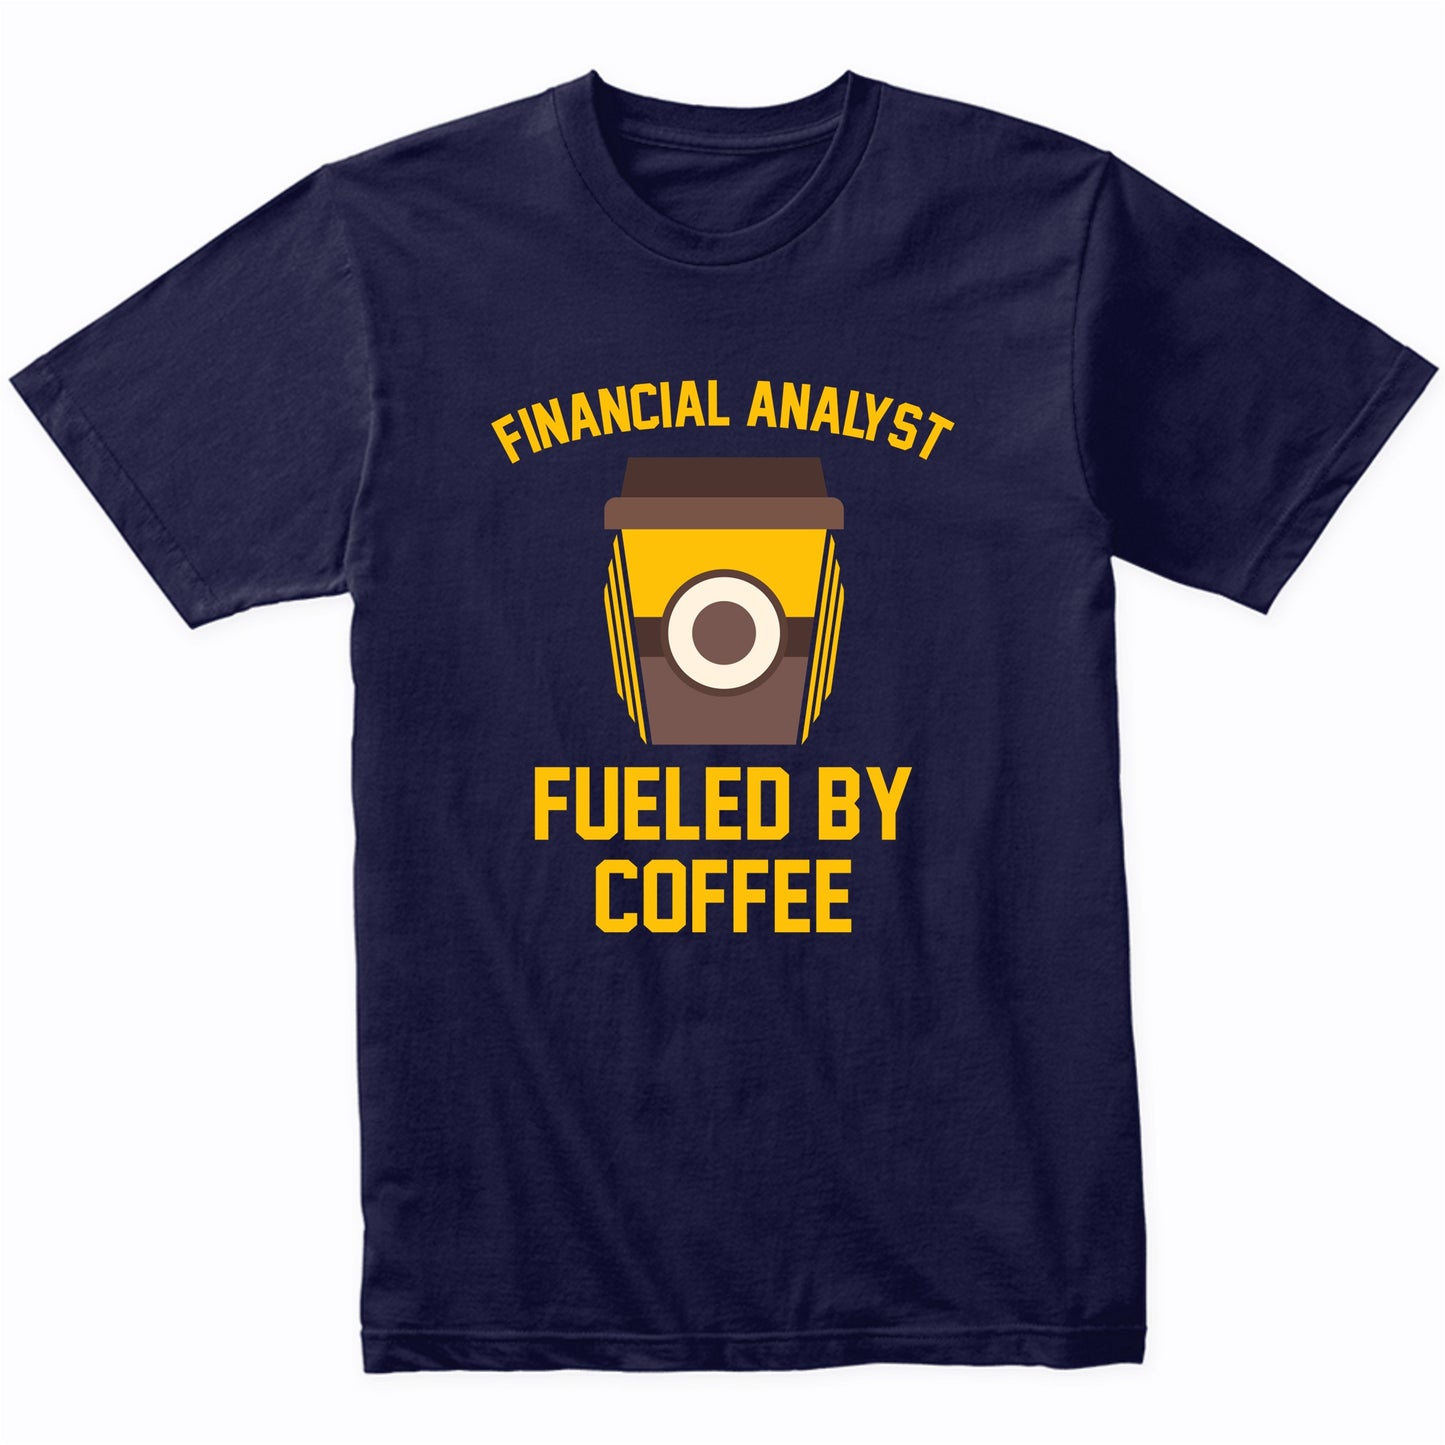 Financial Analyst Fueled By Coffee Funny Shirt